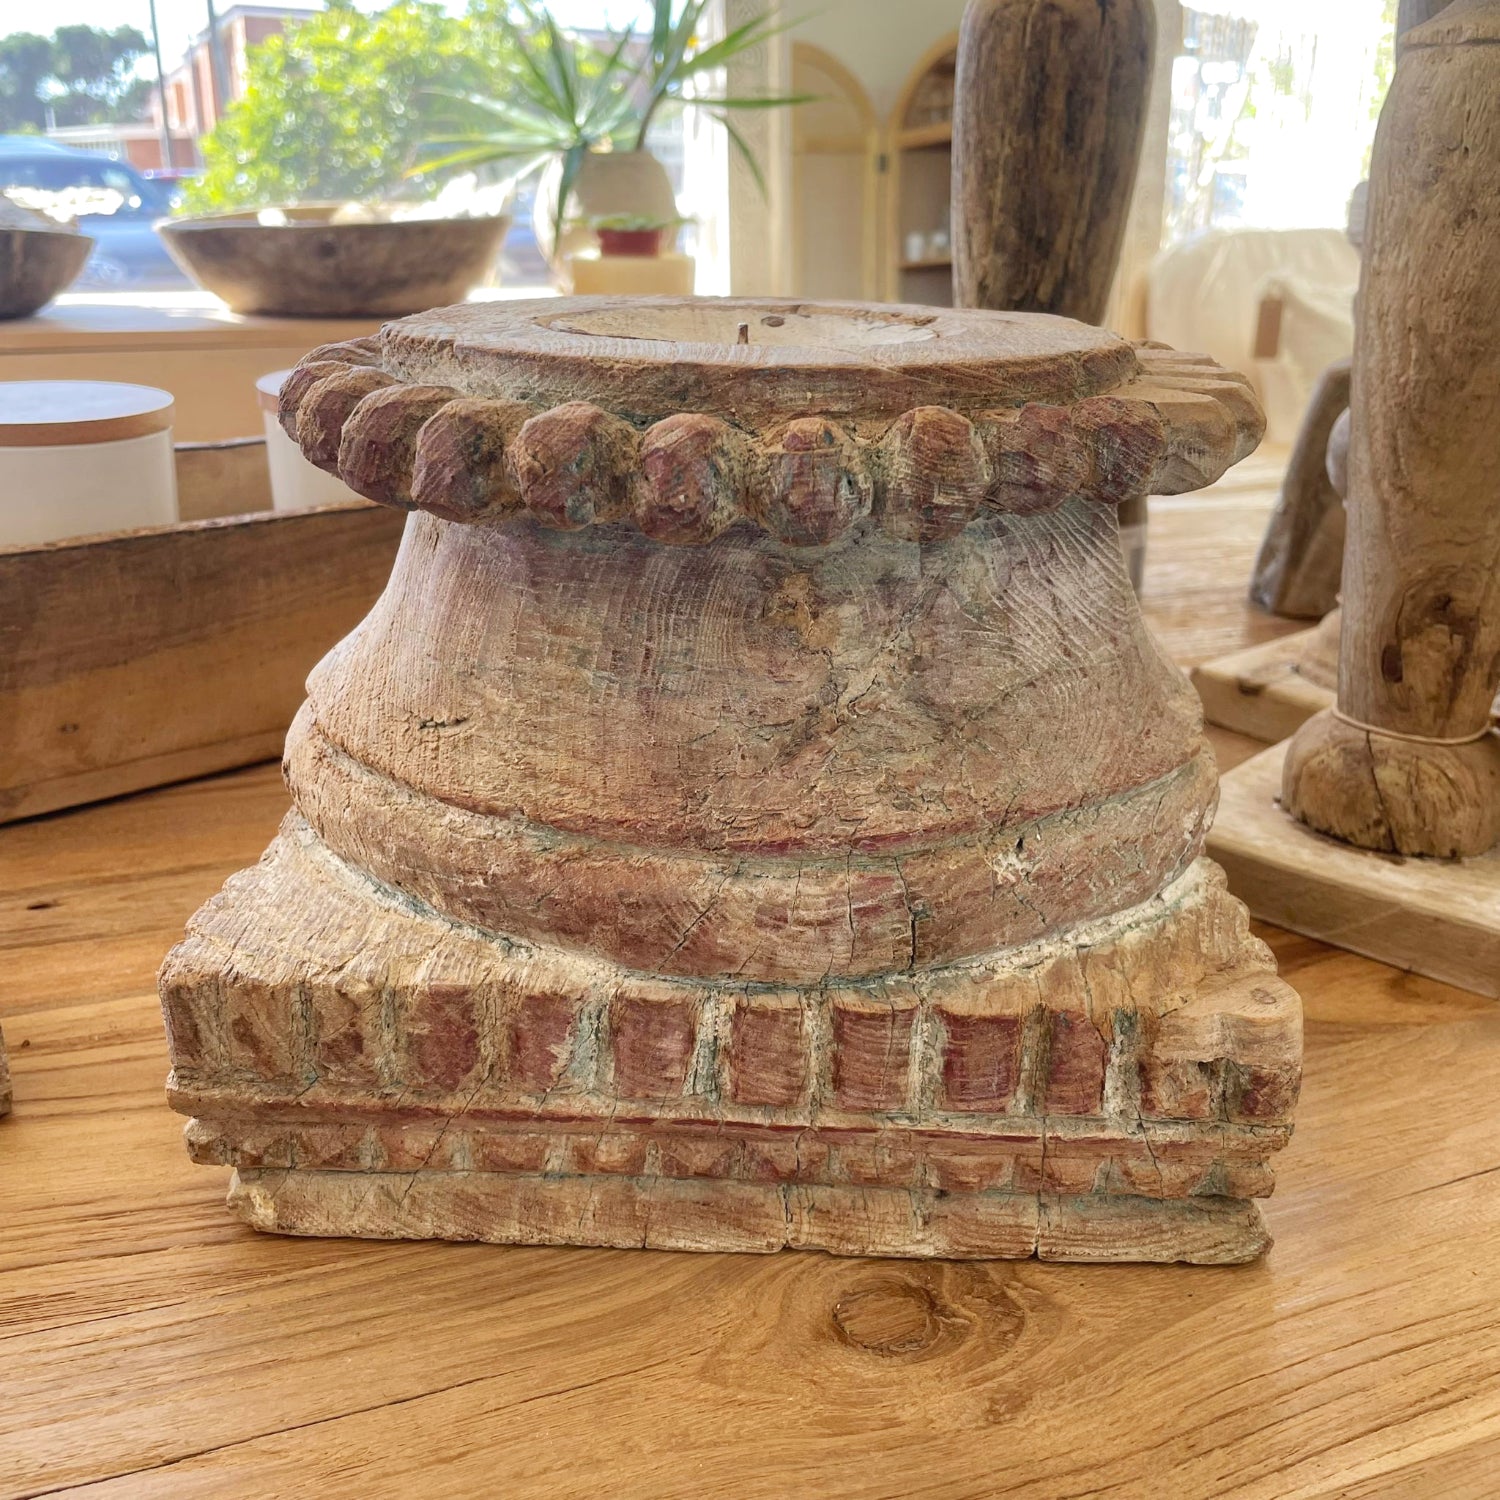 Large Indian Pillar Base Candle Stand - Assorted Designs